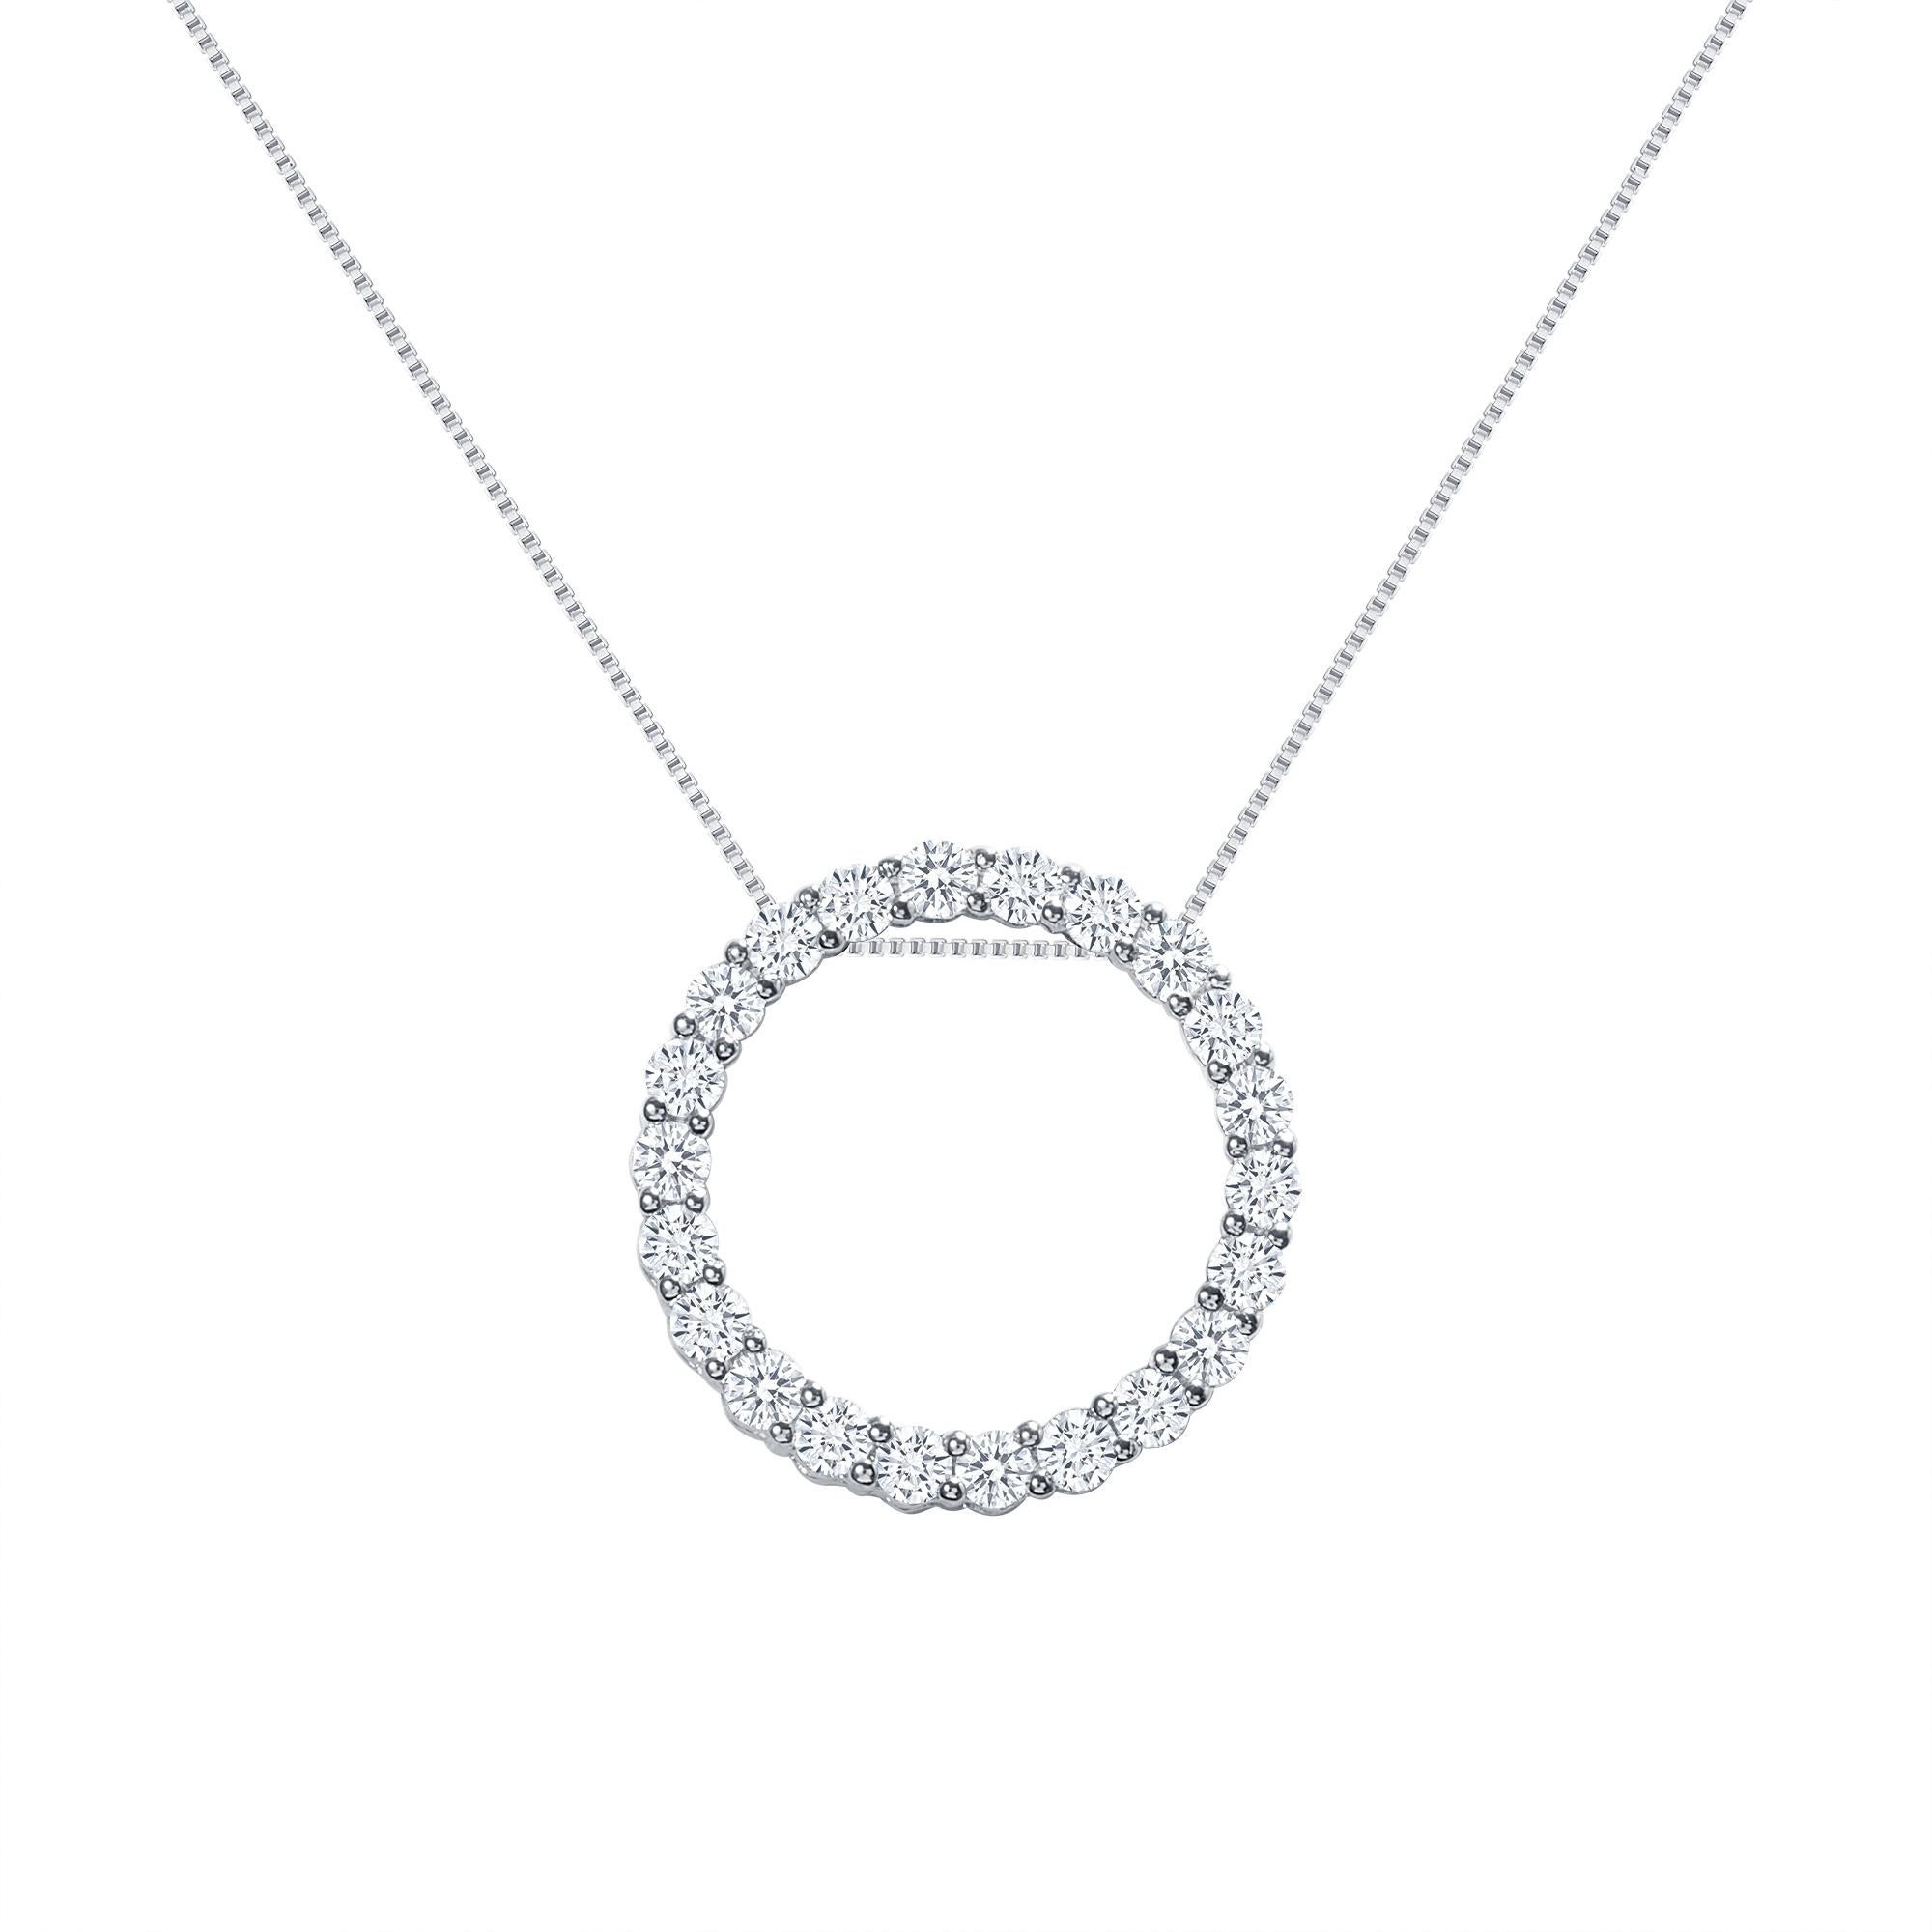 This diamond circle pendant provides a glowing chic look.
Metal: 14k Gold
Diamond Total Carats: 2 carat
Diamond Cut: Round Natural Diamonds (Not Lab Grown)
Diamond Clarity: VS
Diamond Color: F-G
Color: White Gold
Necklace Length: 16 inches